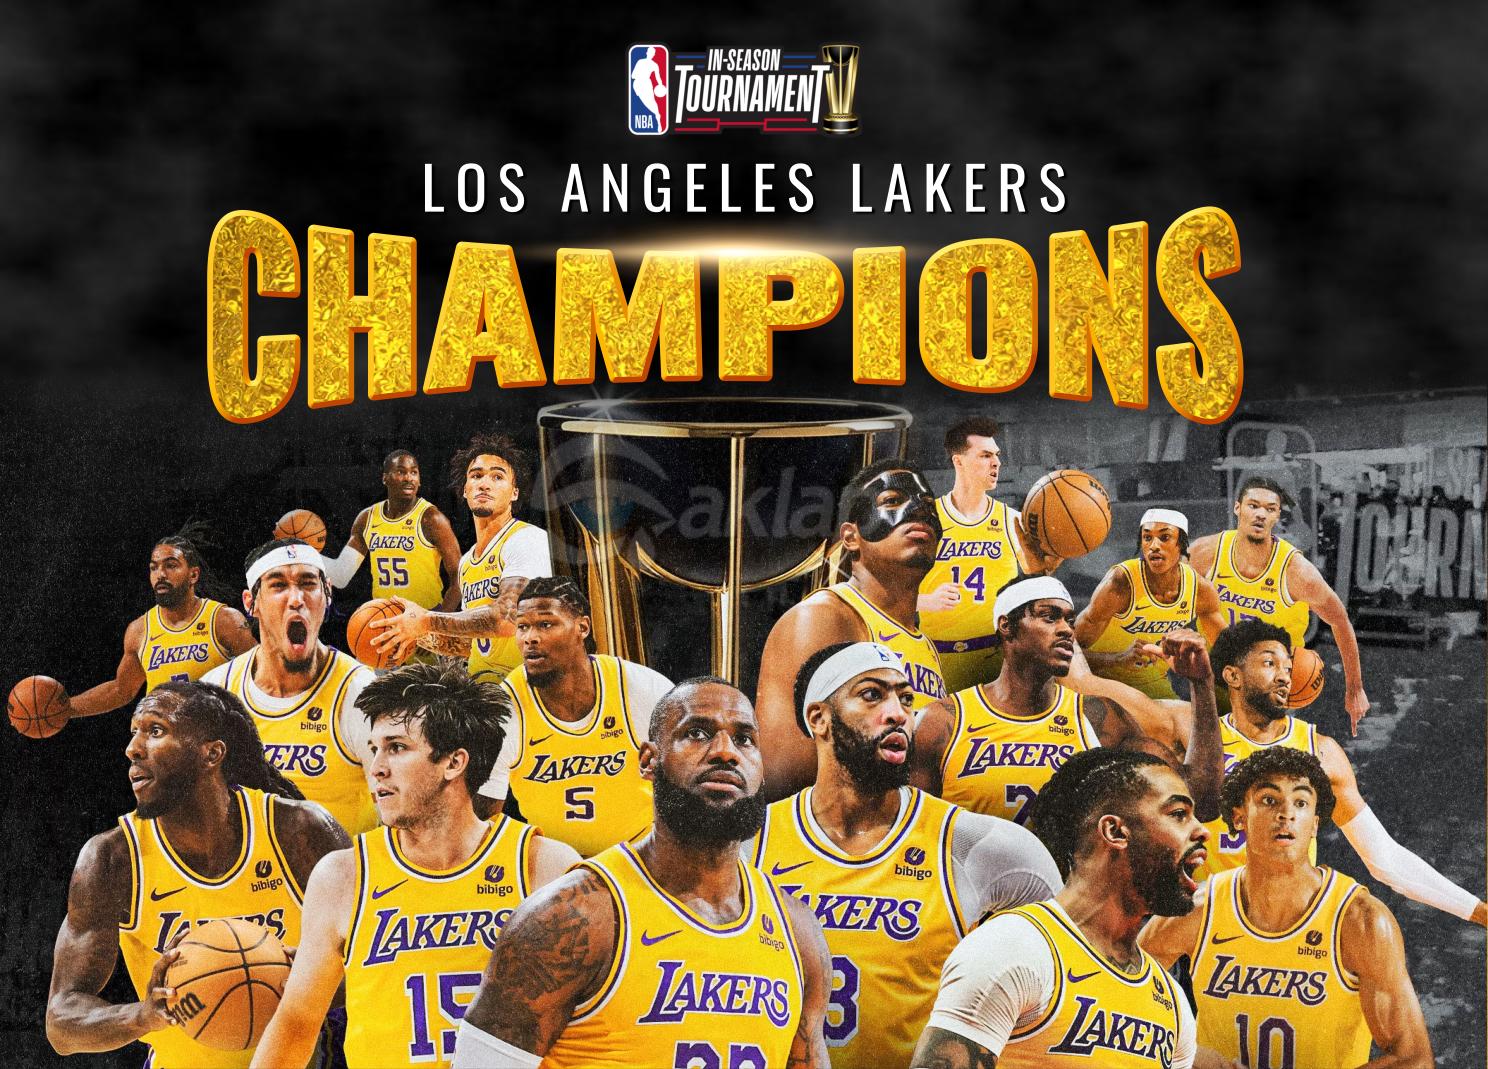 Los Angeles Lakers won the first ever NBA in Season Tournament Trophy